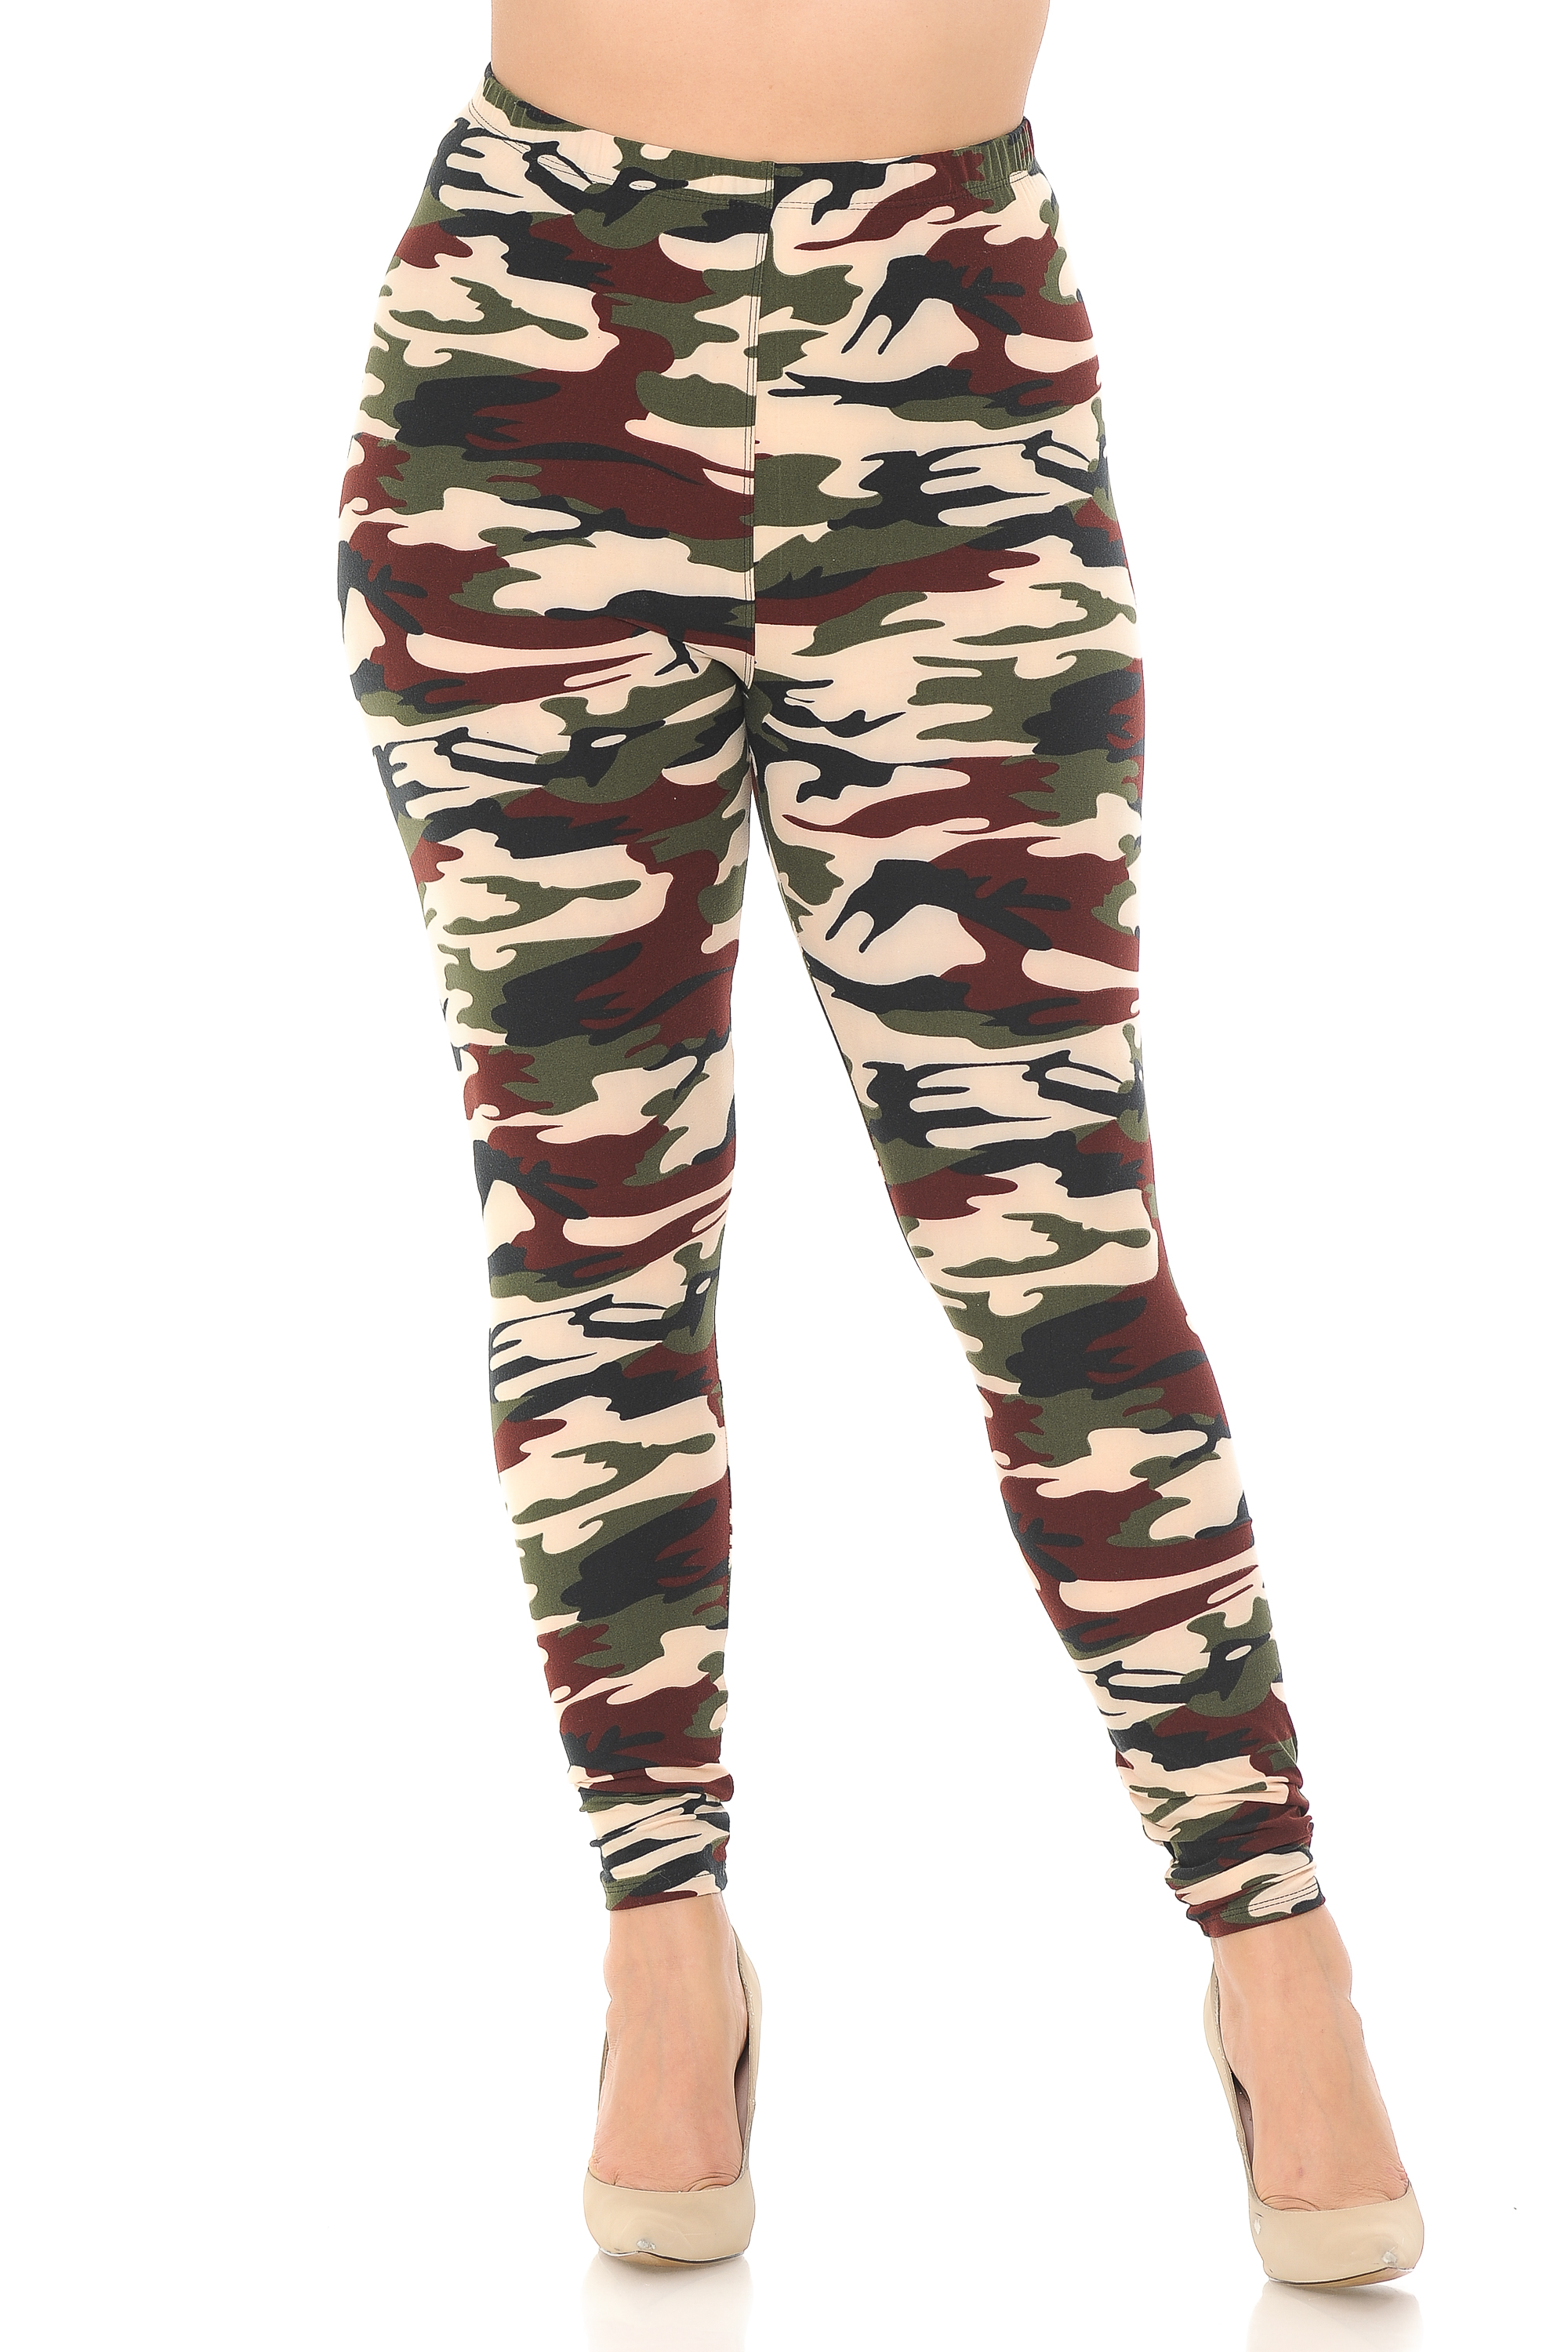 Wholesale Buttery Smooth Cozy Camouflage Plus Size Leggings